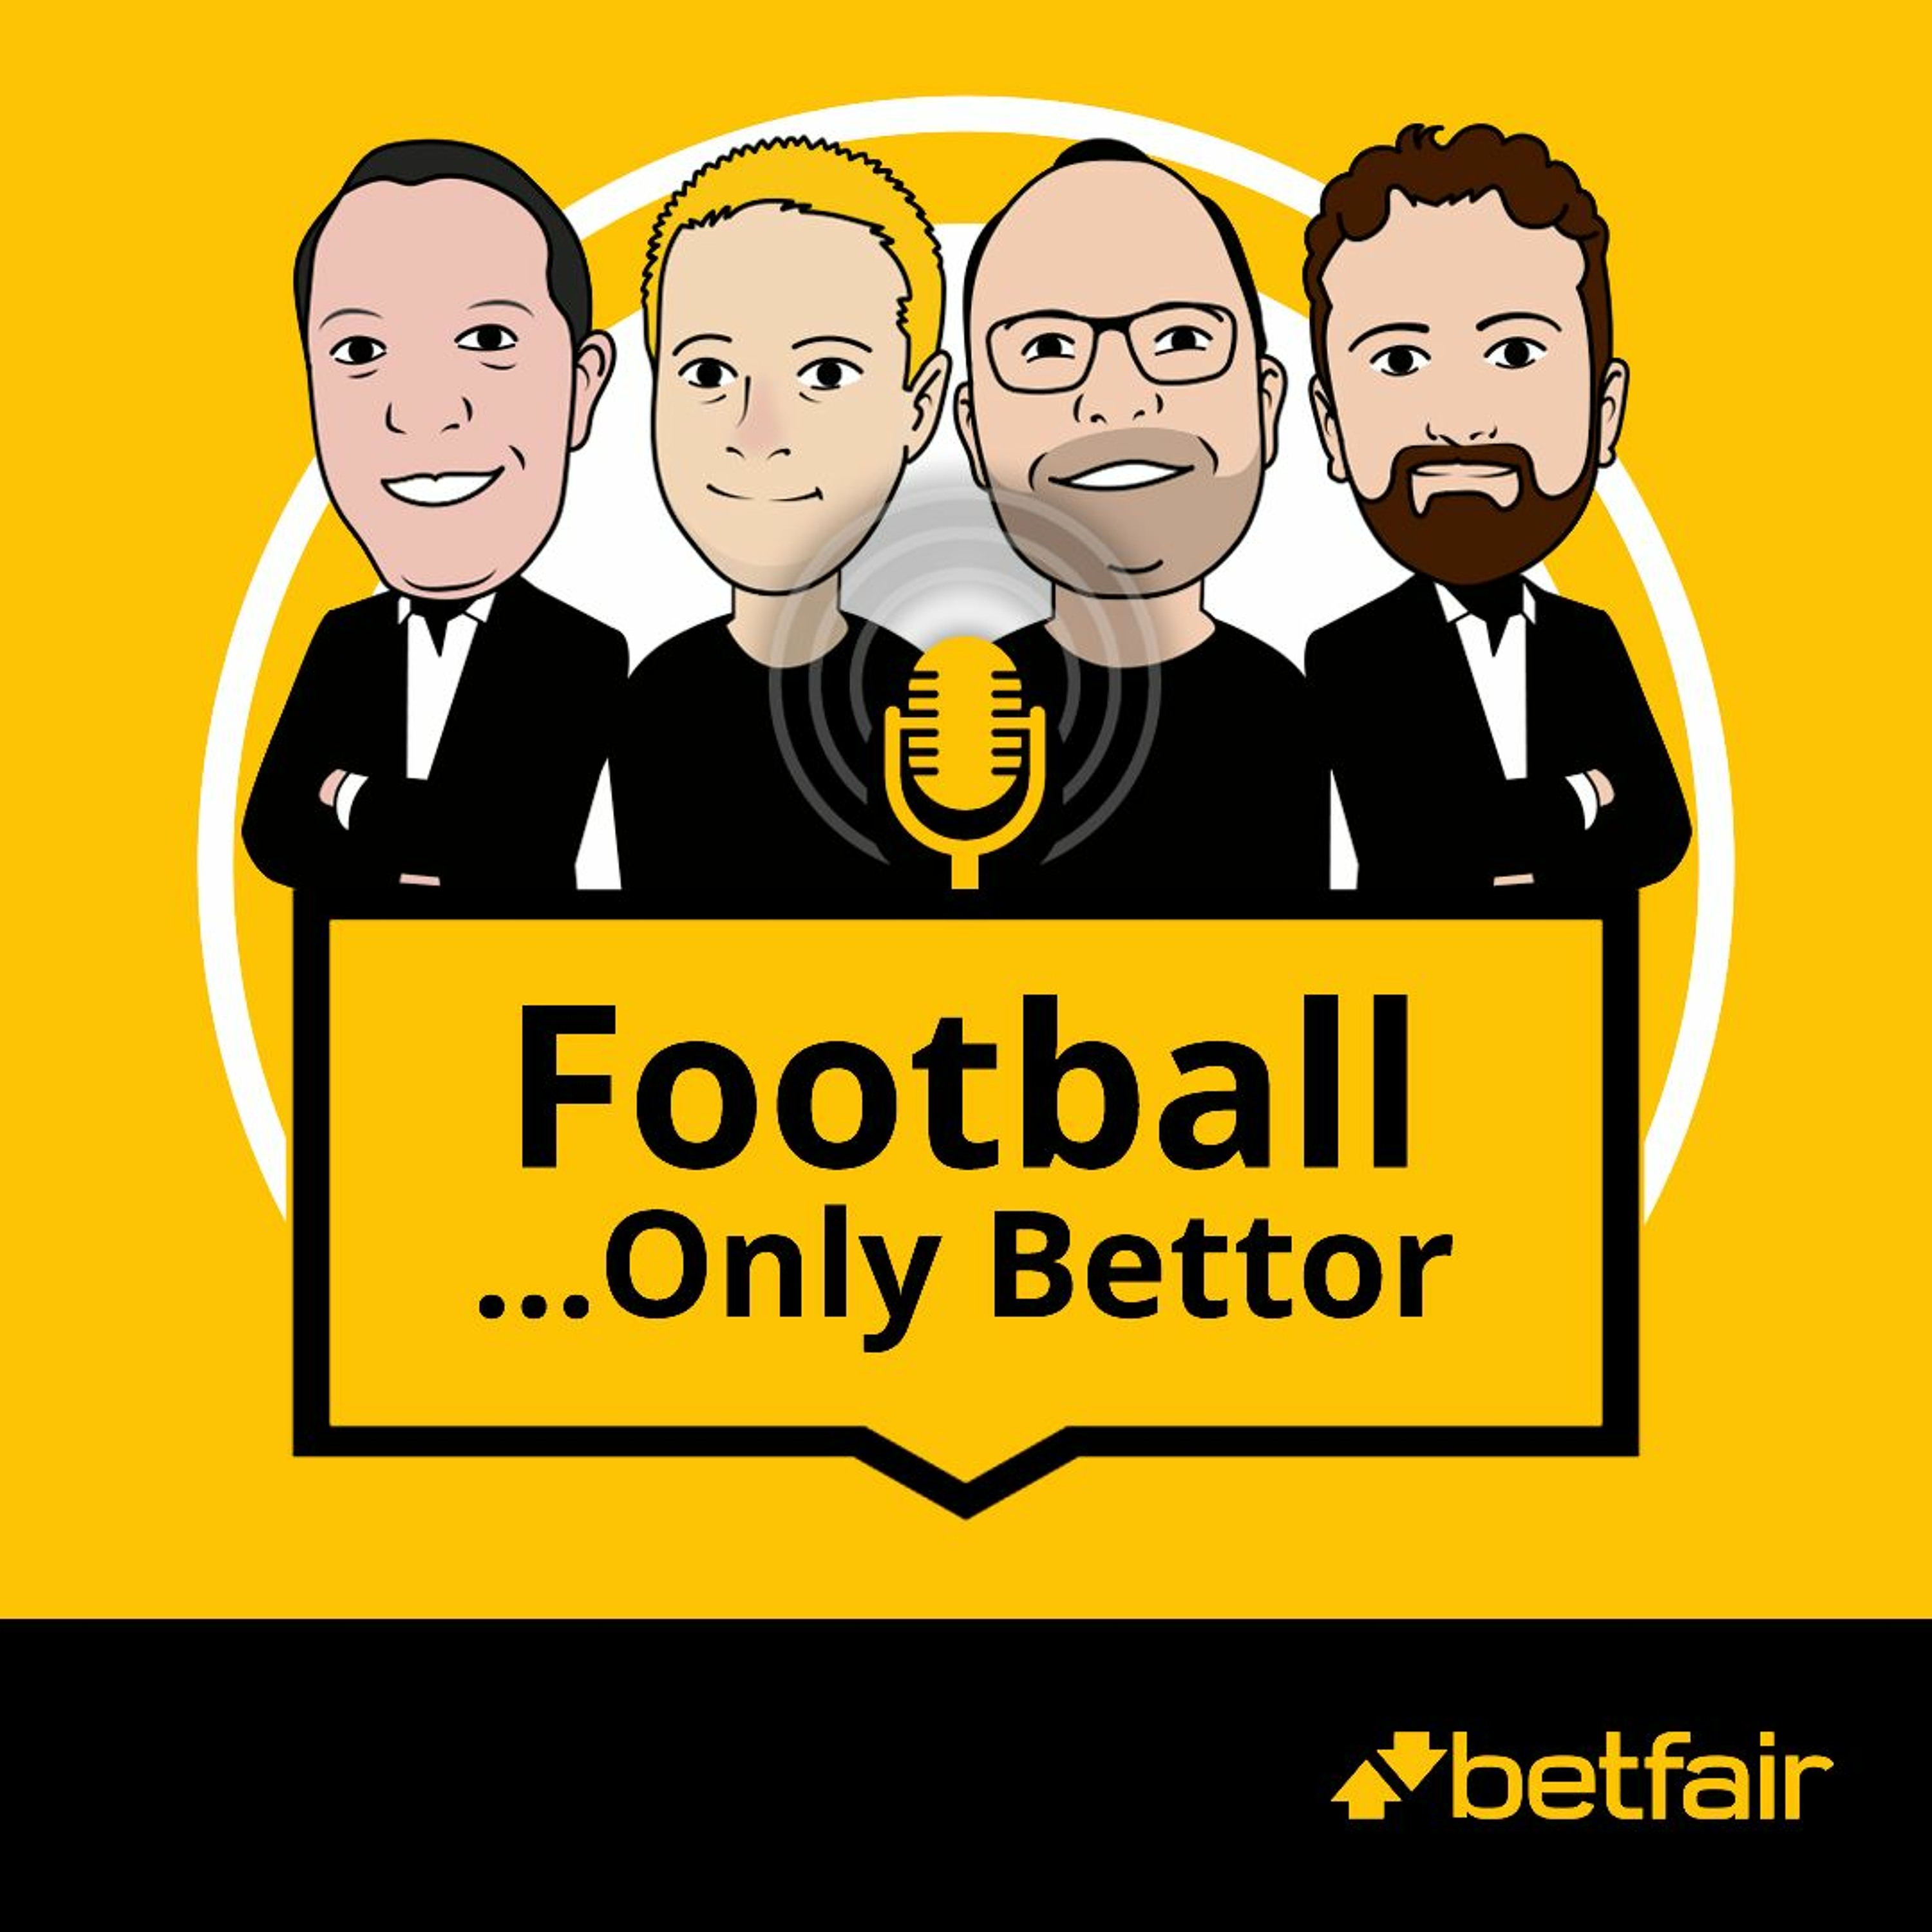 Man City v Arsenal preview | Football…Only Bettor | Episode 340